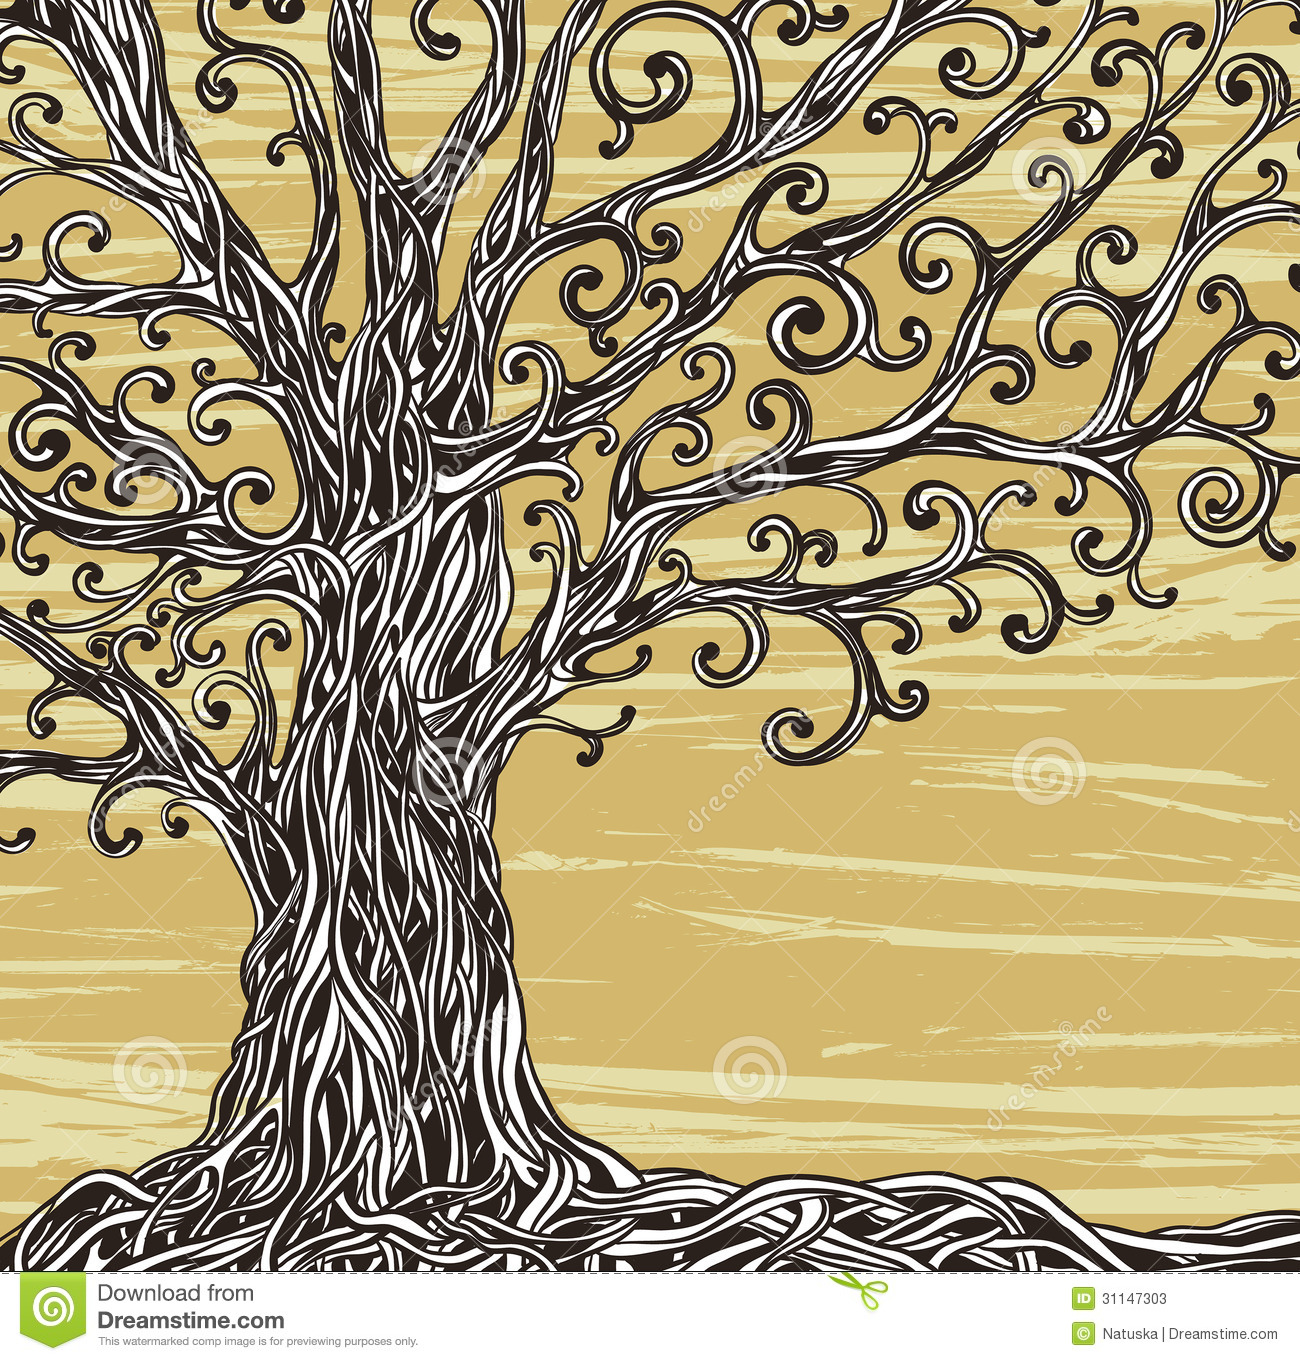 Tree with Roots Graphic